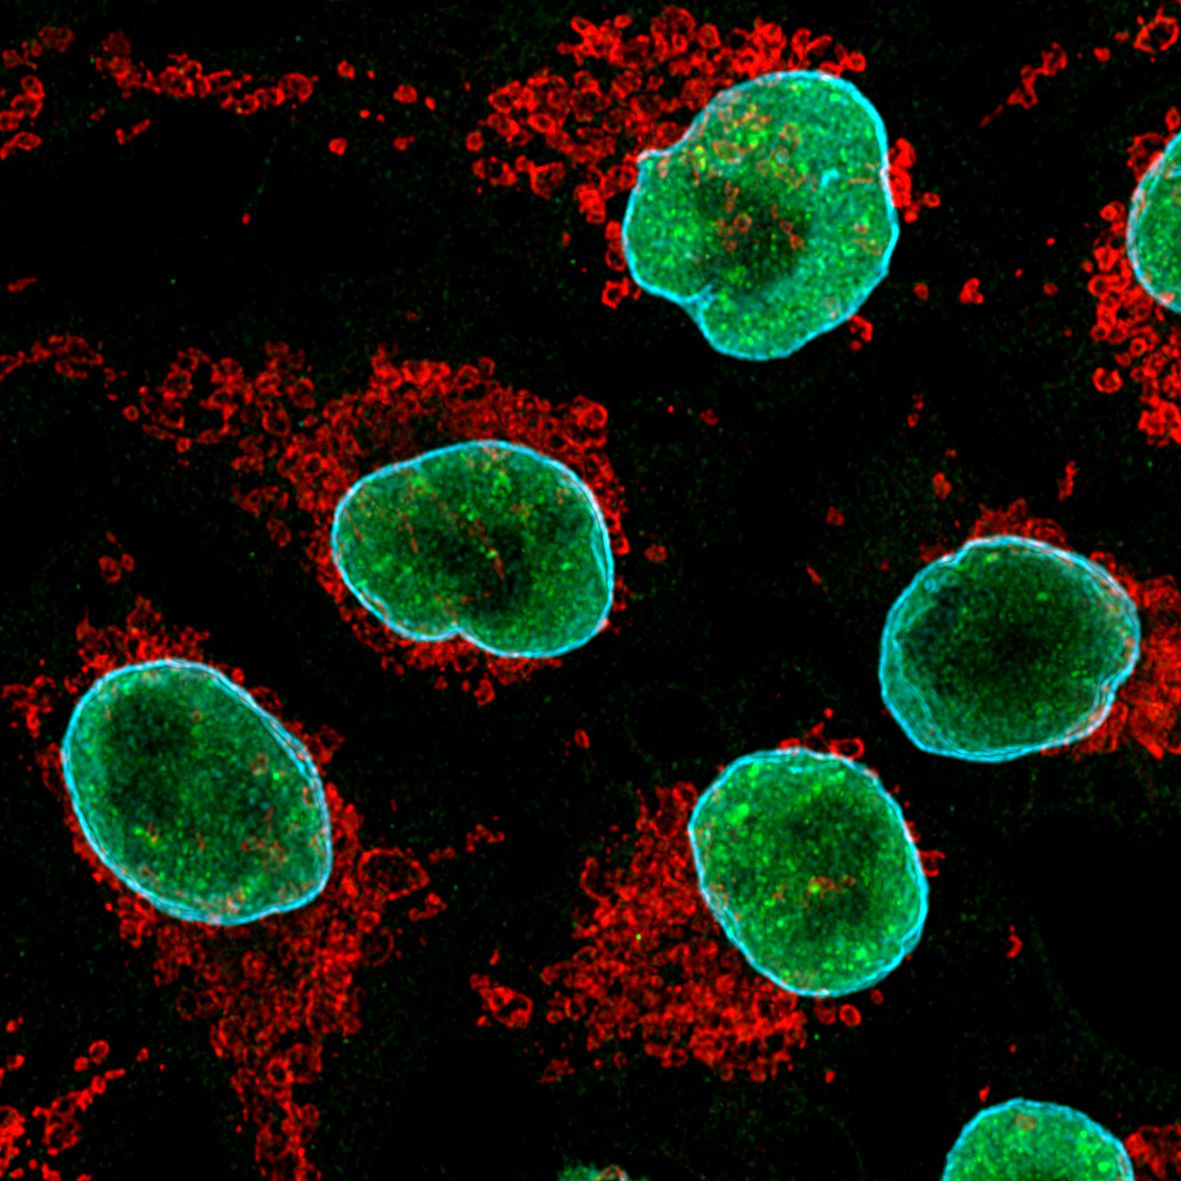 Immunofluorescence of HeLa: PFA-fixed HeLa cells were stained with anti-TDP-43 (10782-2-AP) labeled with FlexAble CoraLite® 488 Kit (KFA001, green), anti-Tom20 (11802-1-AP) labeled with FlexAble CoraLite® Plus 555 Kit (KFA002, red) and anti-Lamin B1 (12987-1-AP) labeled with FlexAble CoraLite® Plus 647 Kit (KFA003, cyan).​ Confocal images were acquired with a 100x oil objective and post-processed. Images were recorded at the Core Facility Bioimaging at the Biomedical Center, LMU Munich.